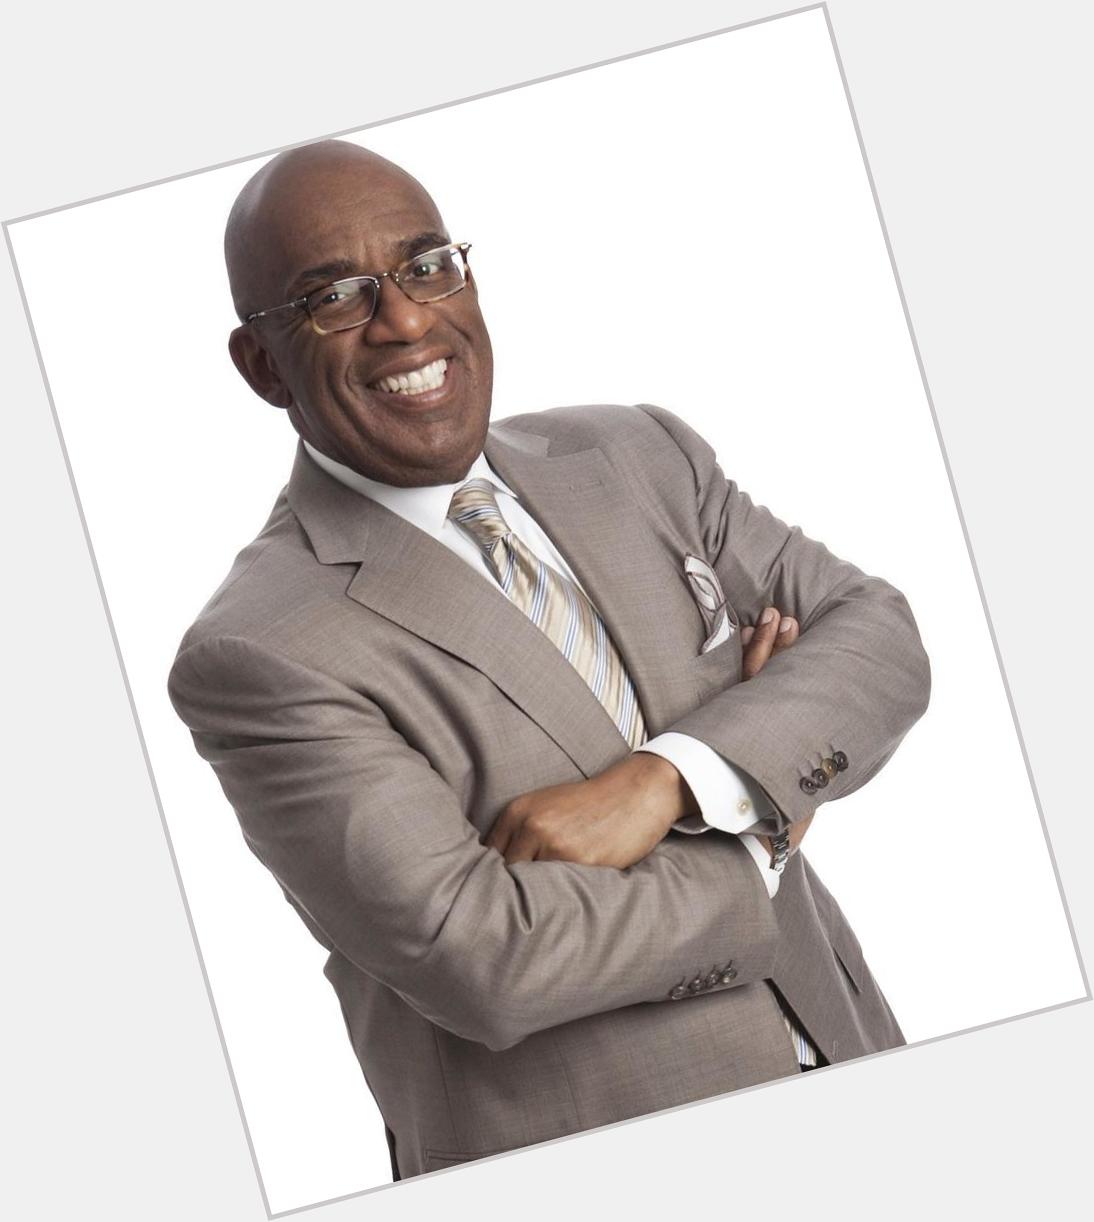 Happy Birthday to TV Personality and Weatherman Al Roker who tirns 61 years young today. Make it a great day Al!!! 